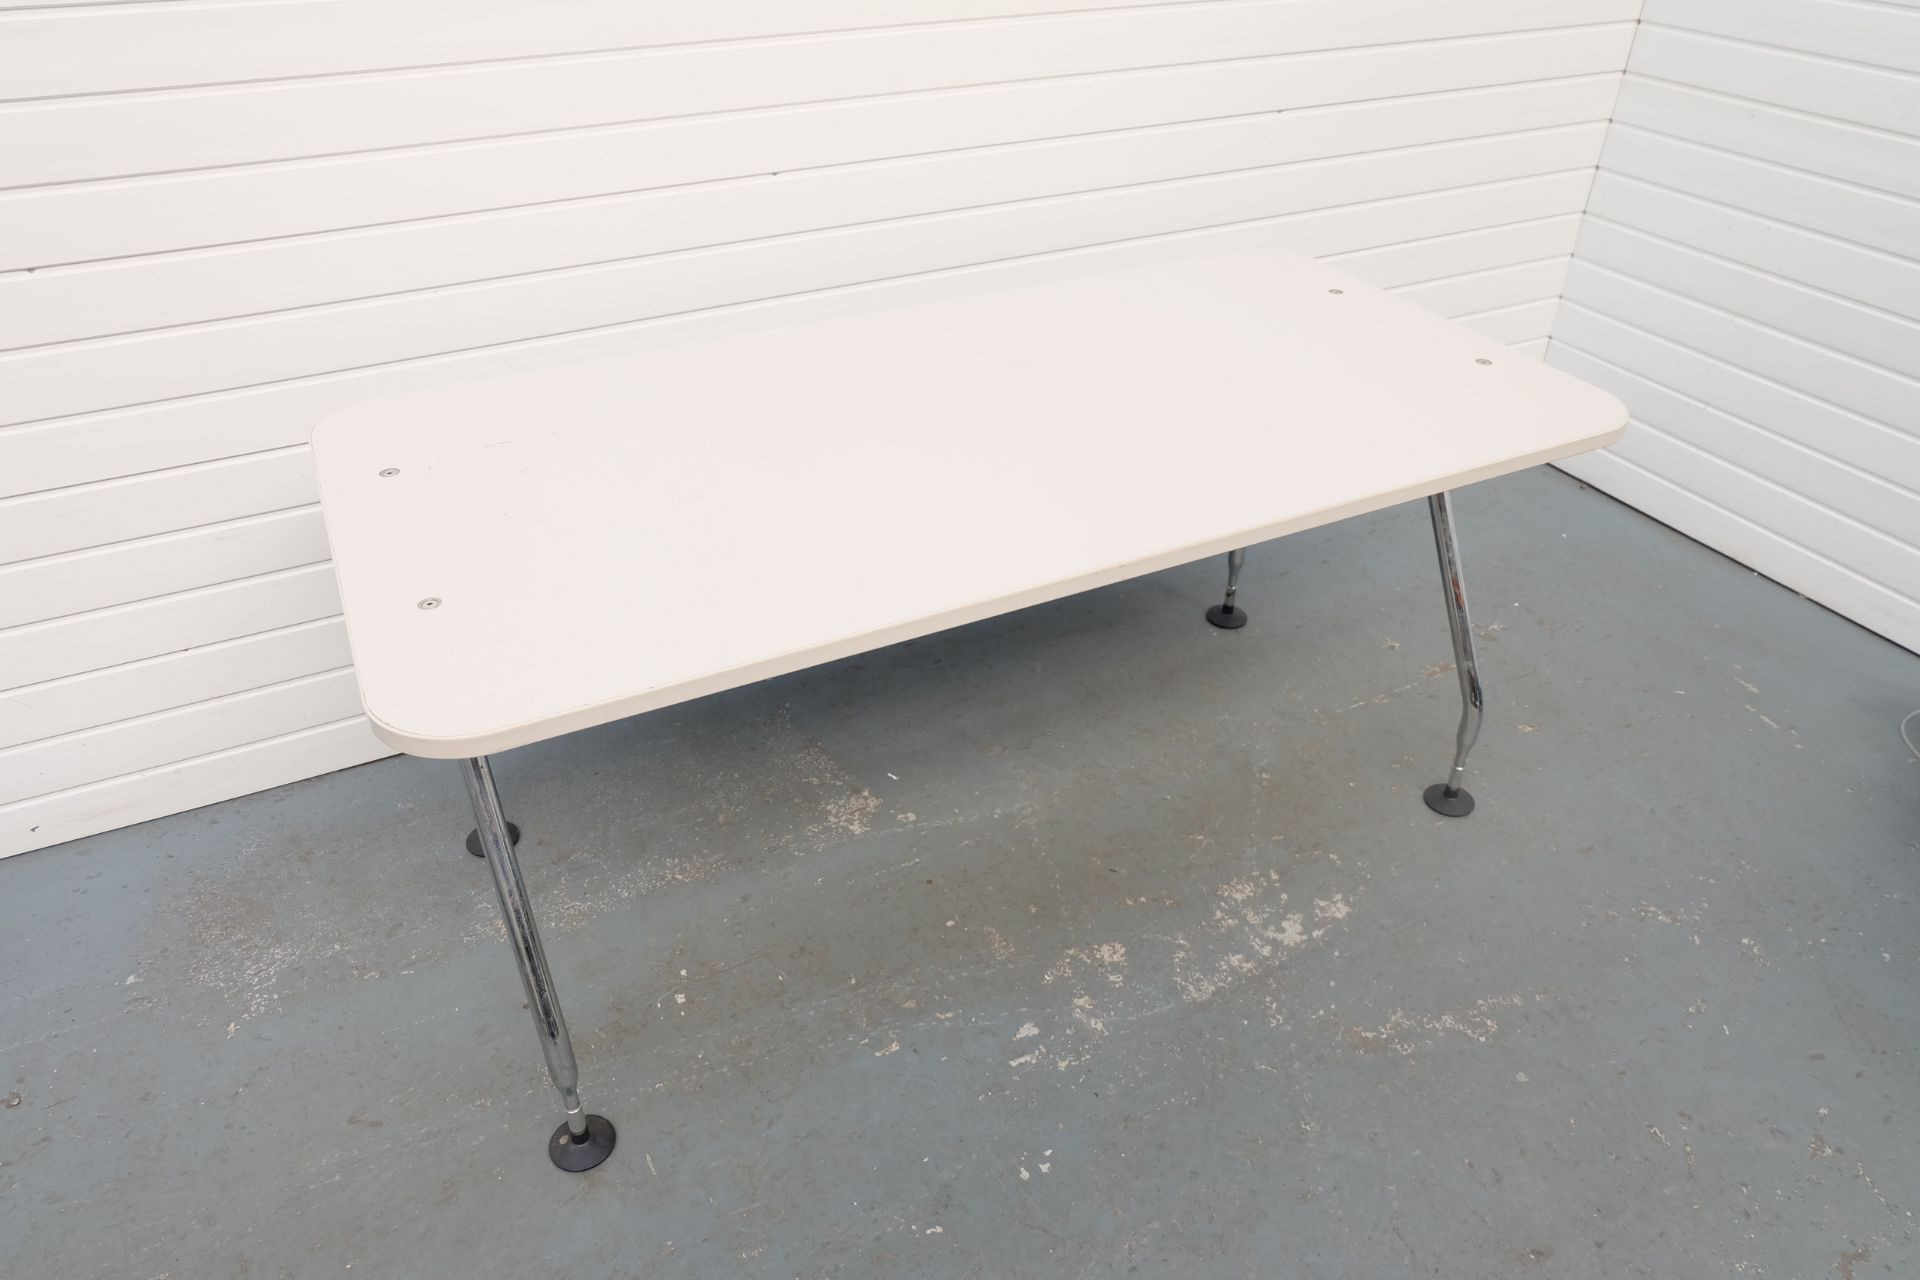 Chrome Legged Table With Adjustable Feet. Size 1600mm x 800mm x 720mm High. - Image 2 of 2